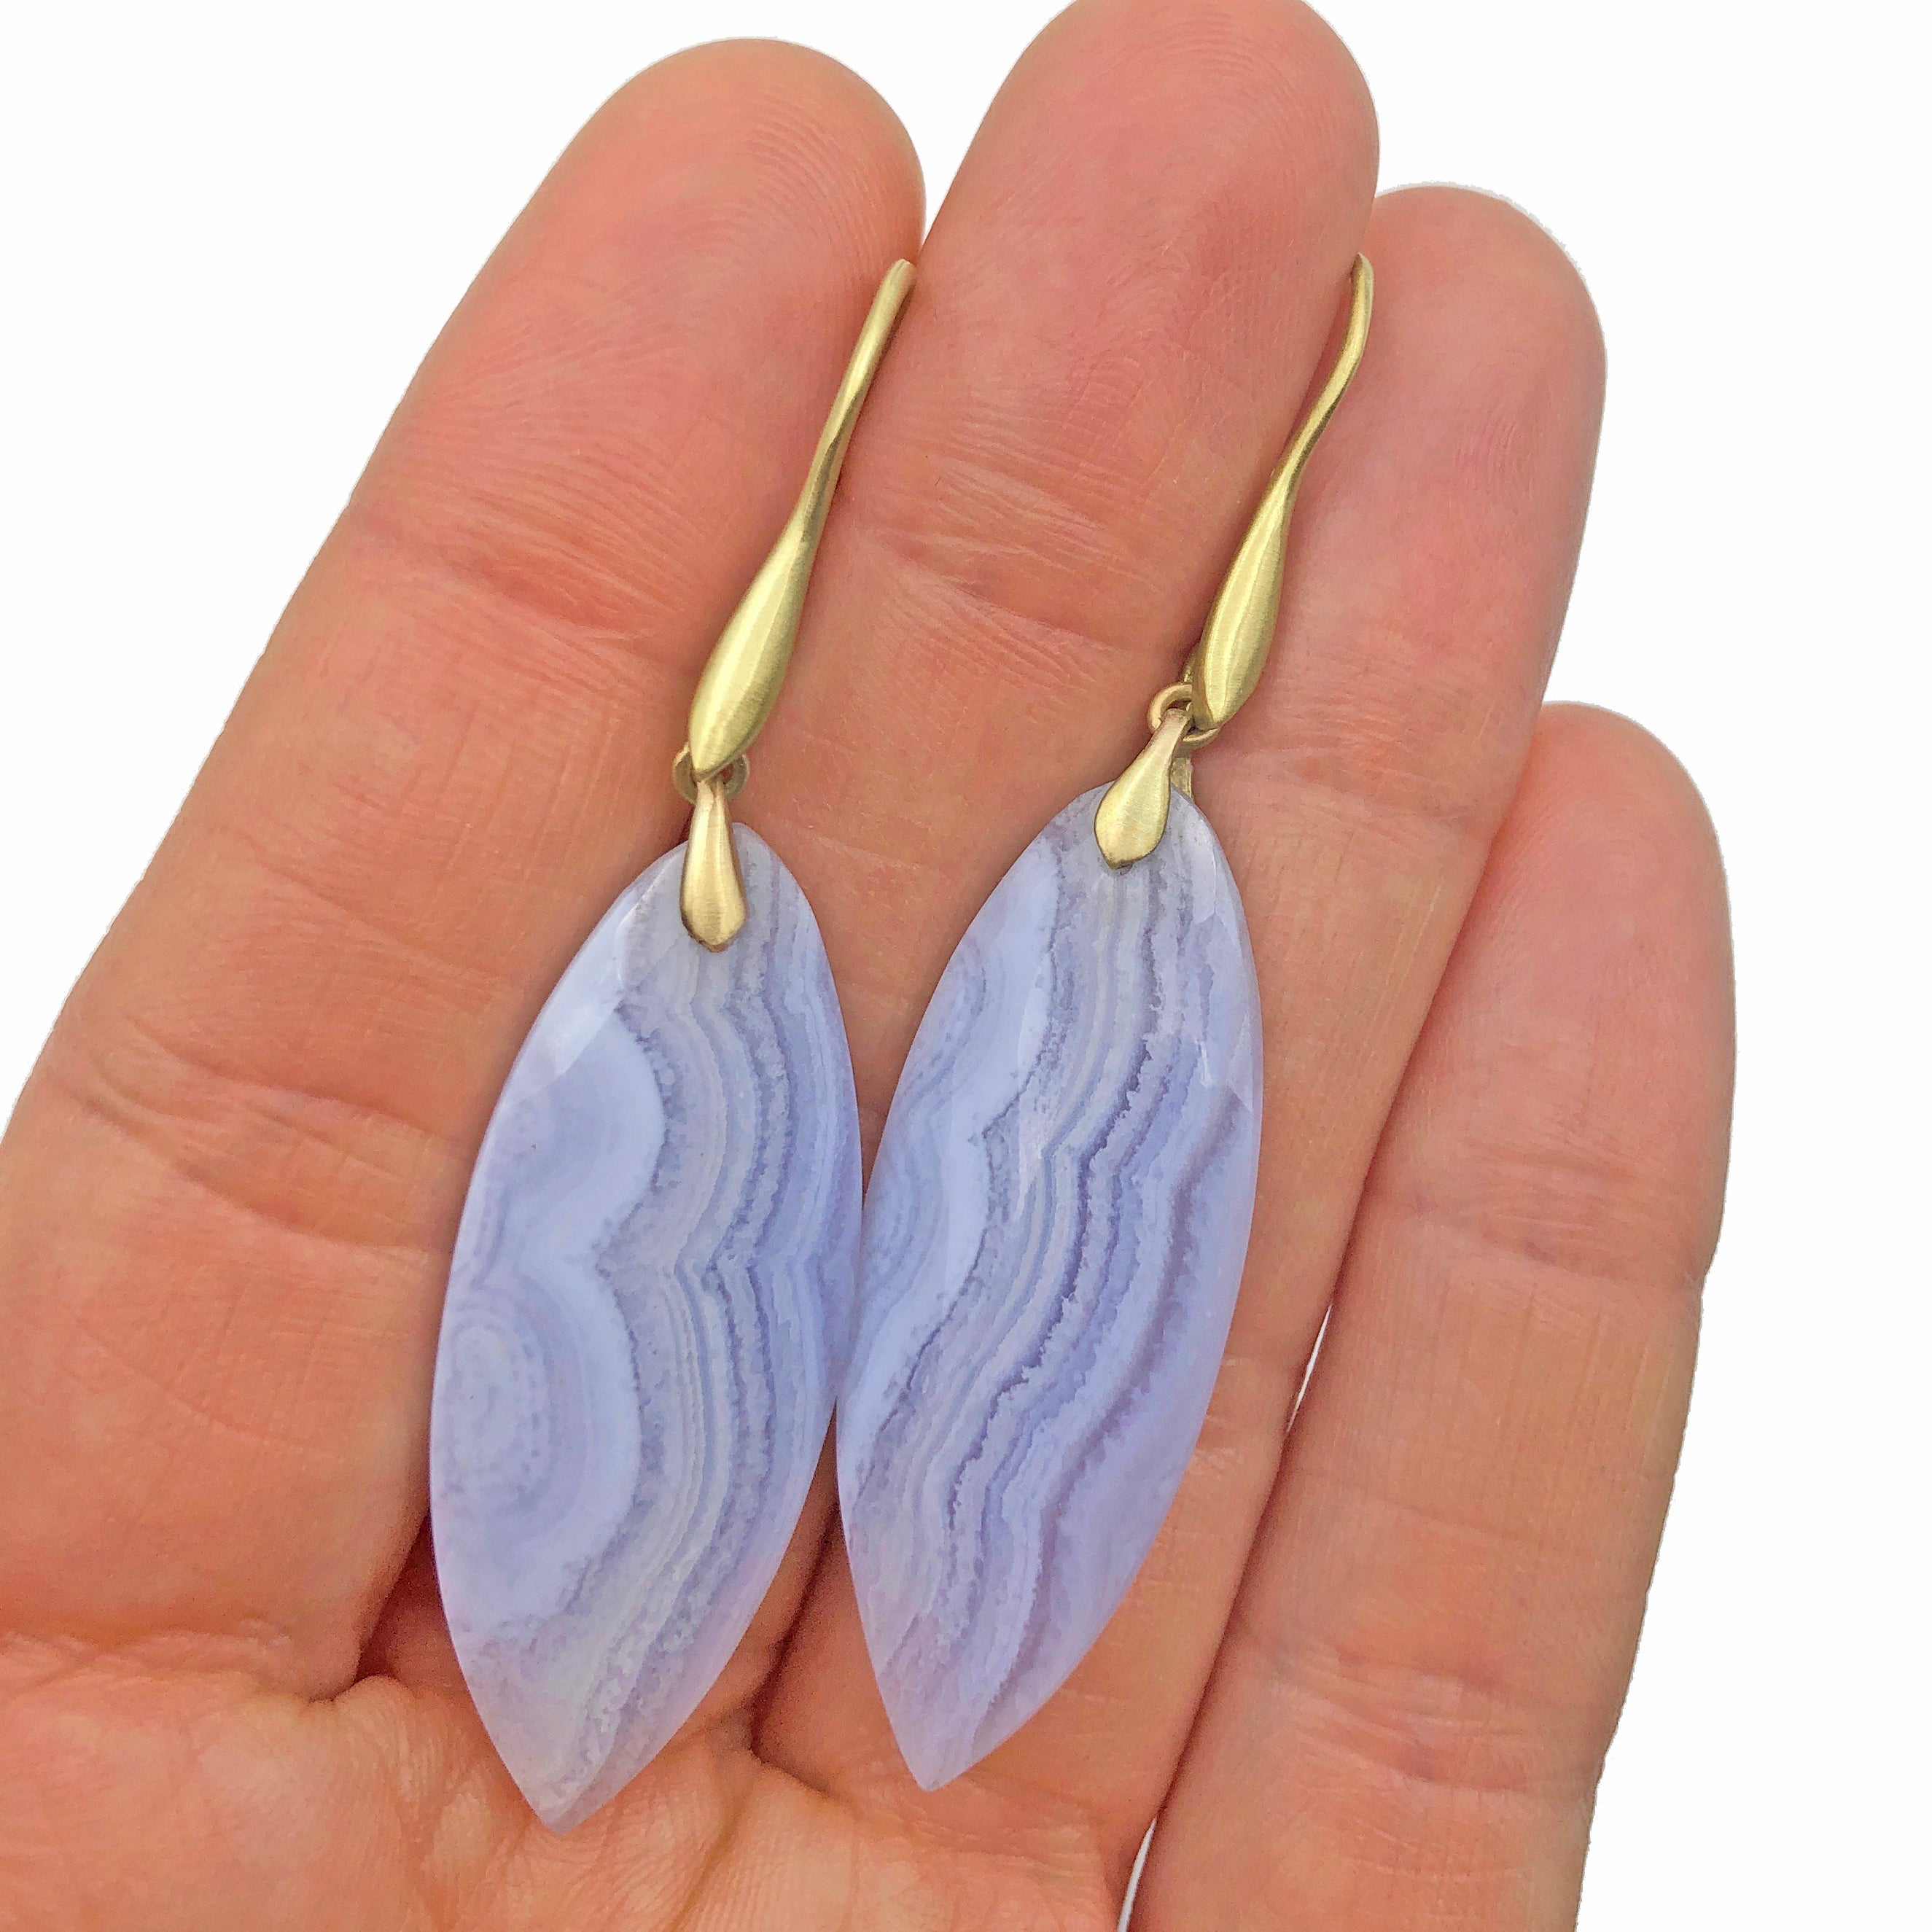 Blue Lace Agate Marquise Earrings